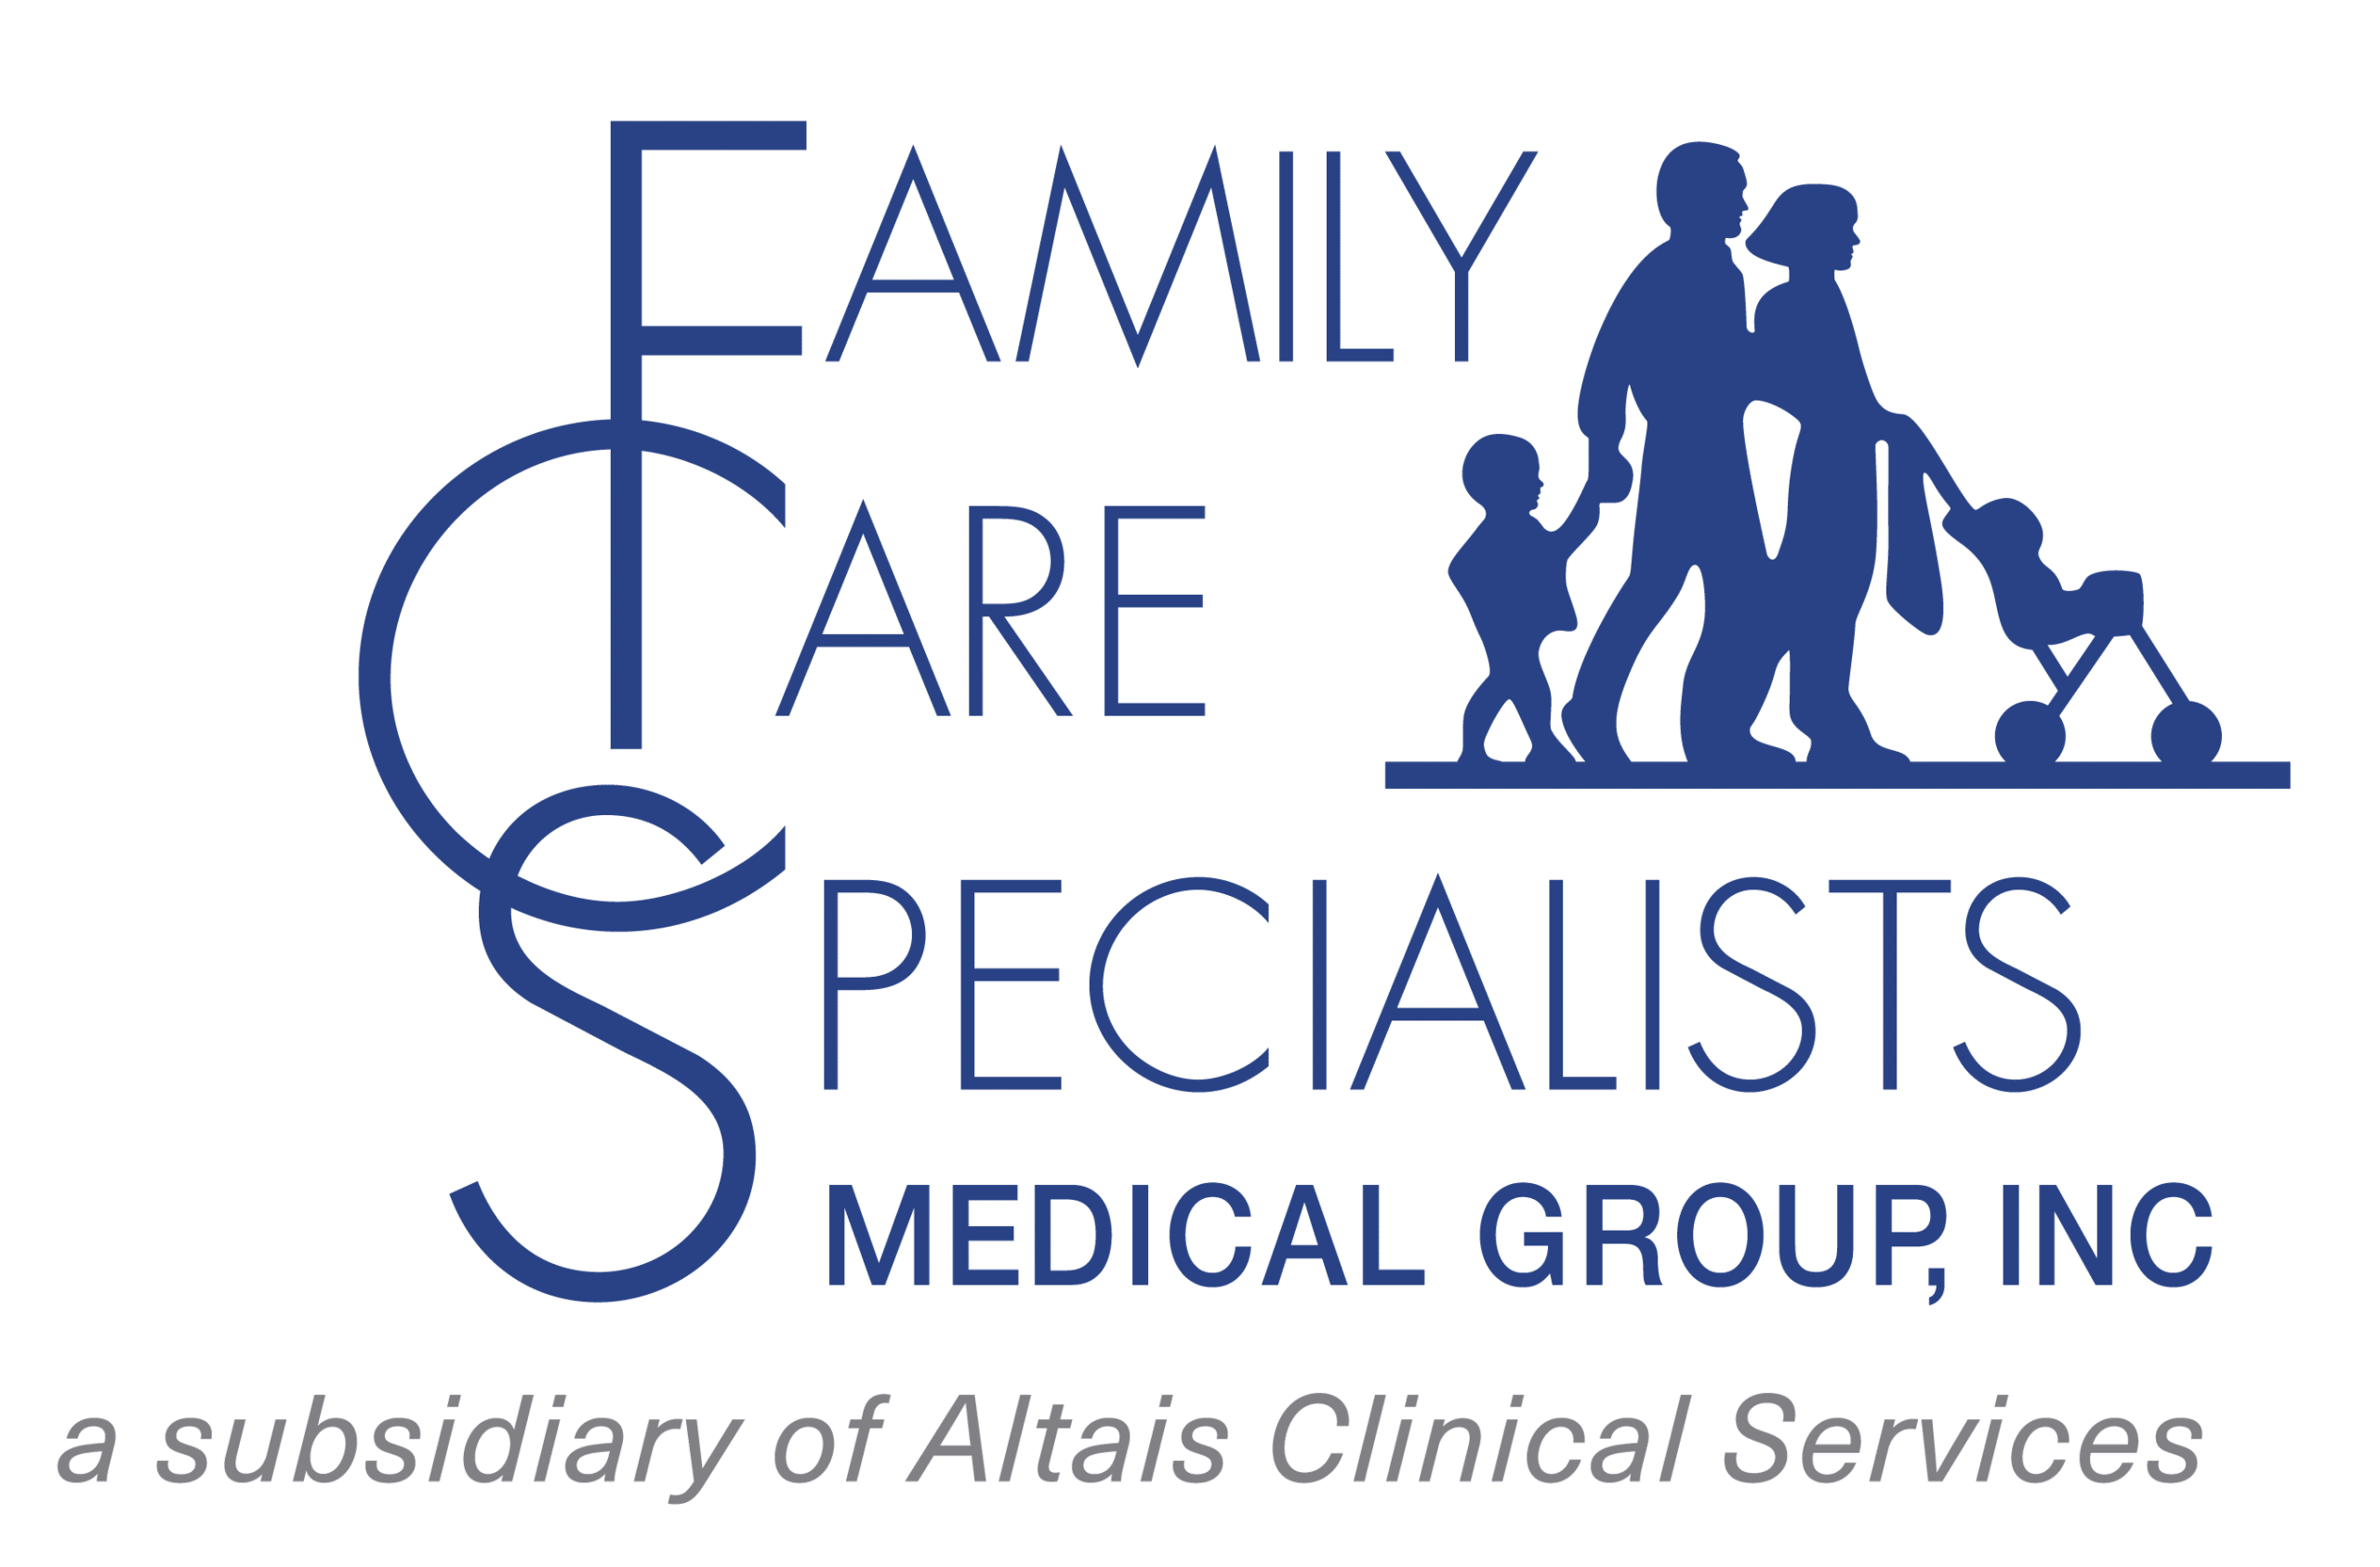 Family Care Specialists